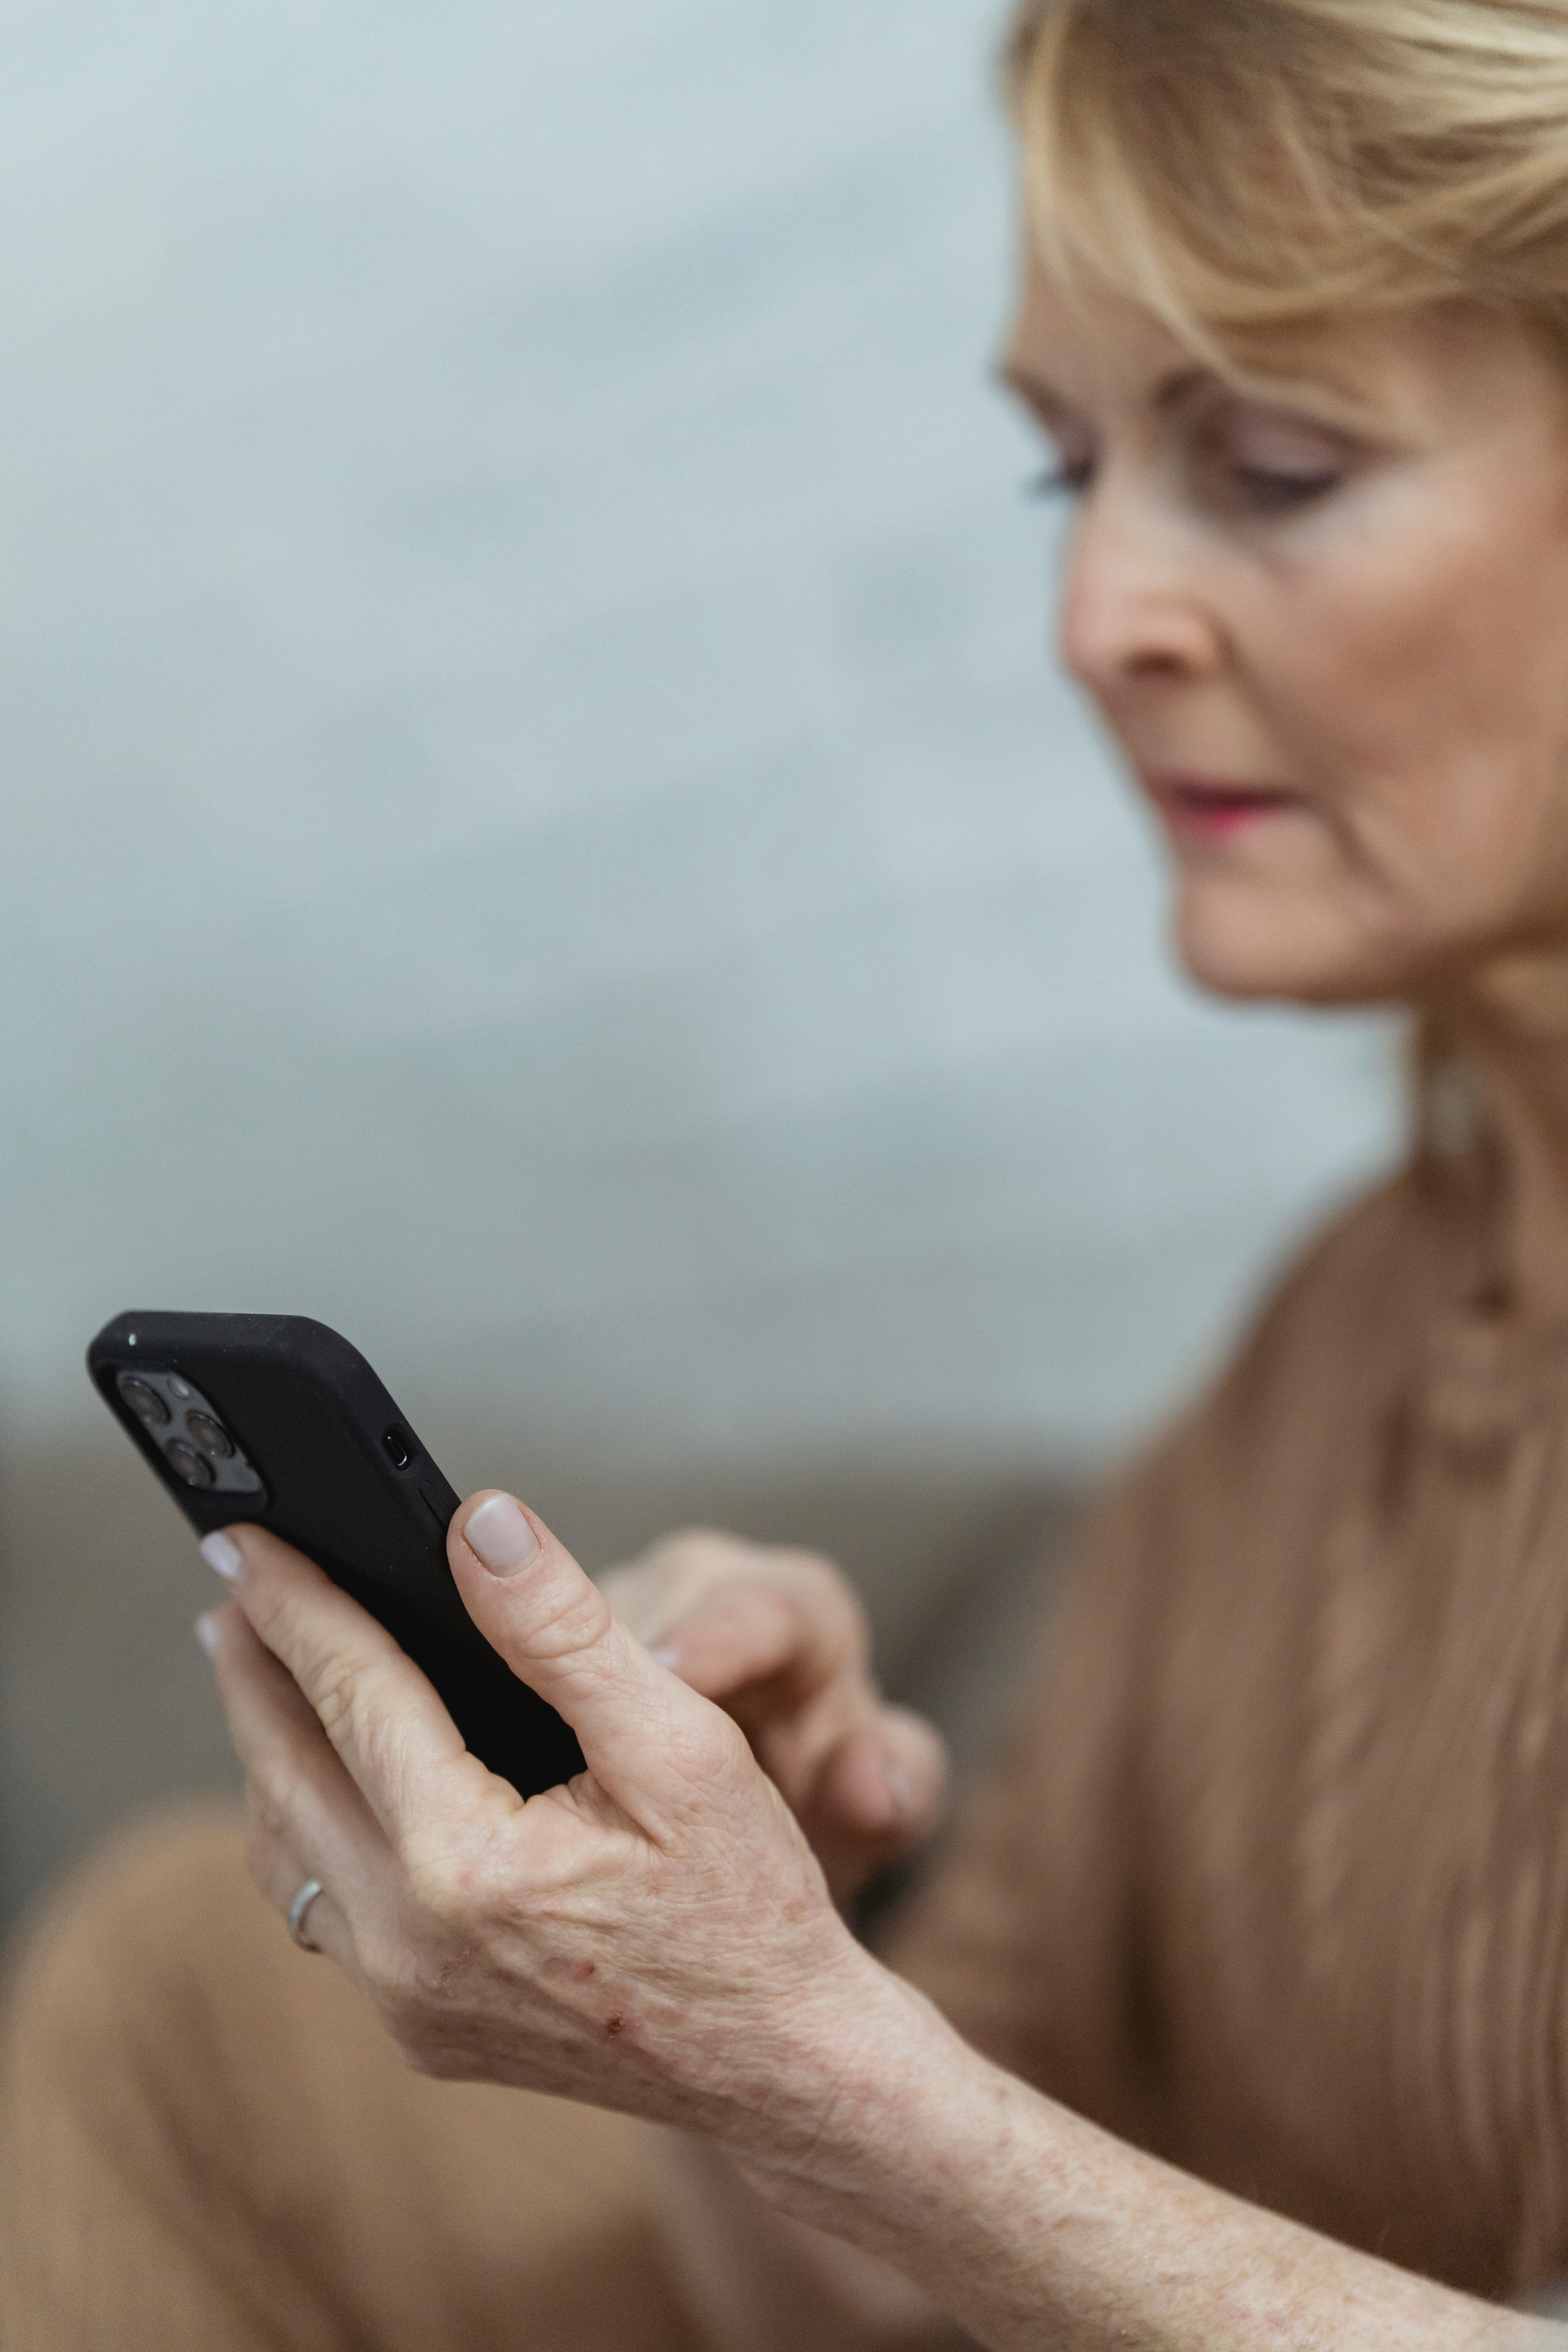 An older woman on call | Source: Pexels